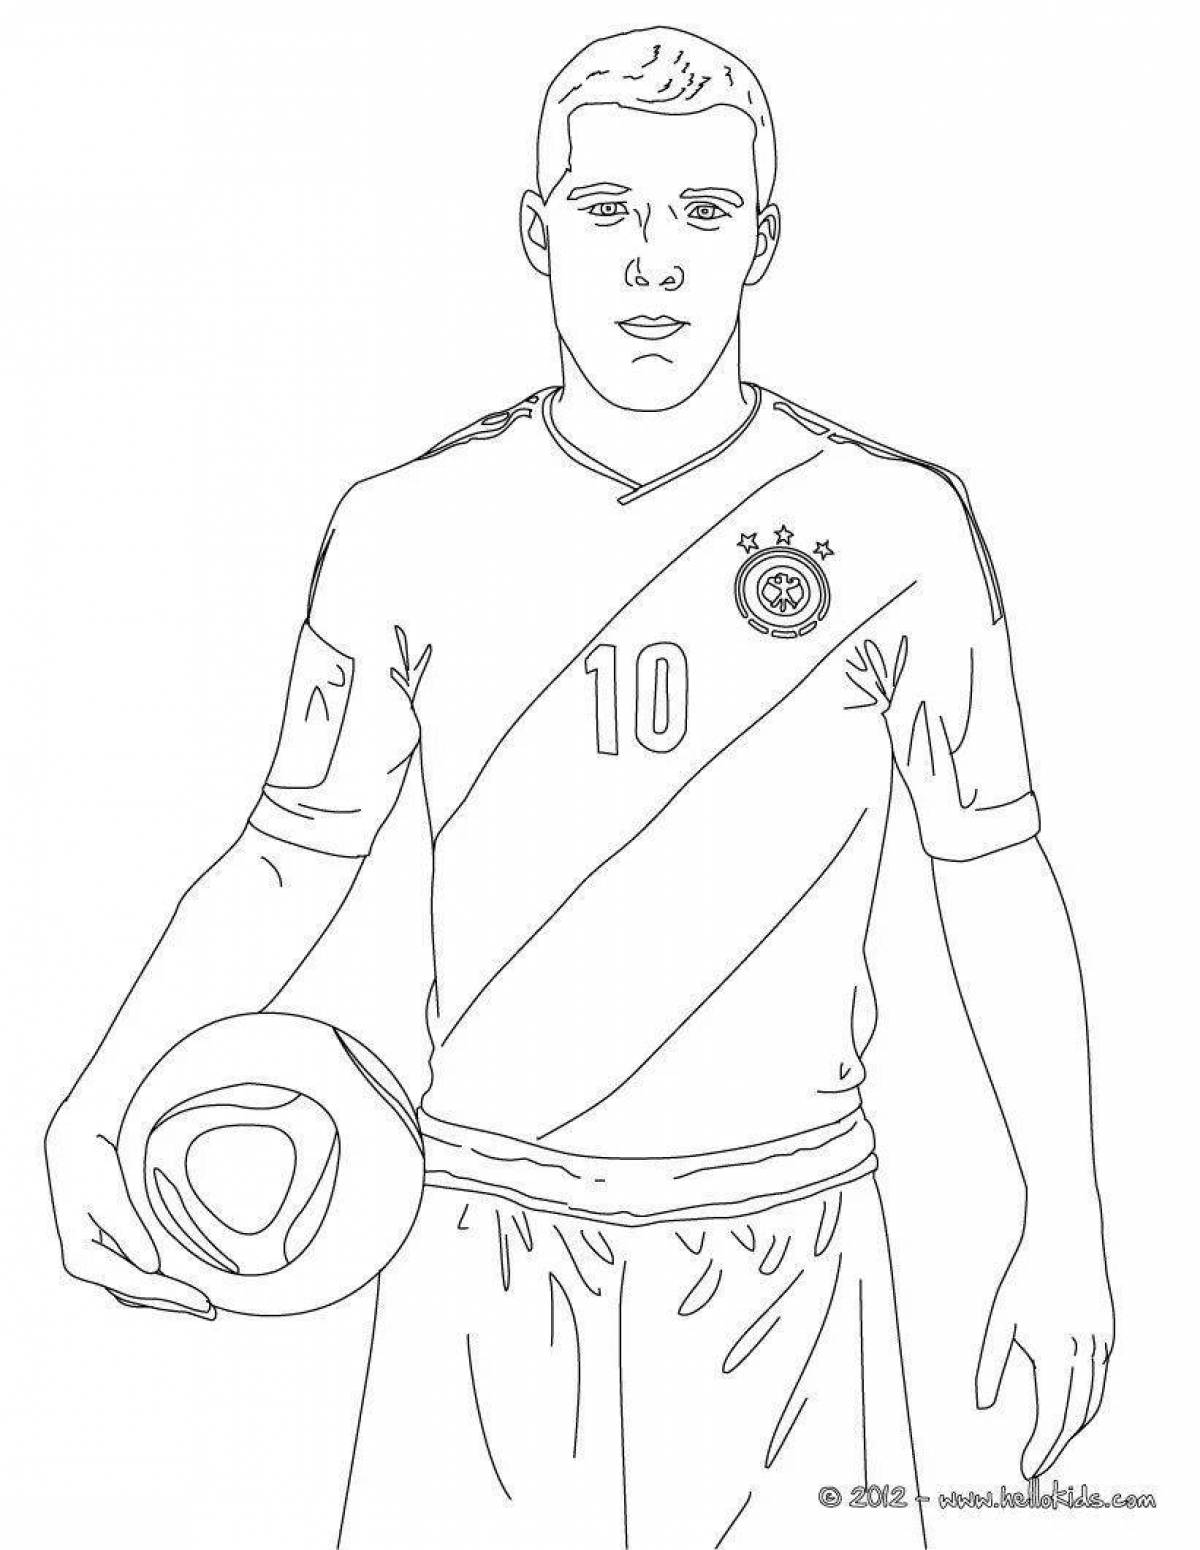 Coloring page soccer jovial pele